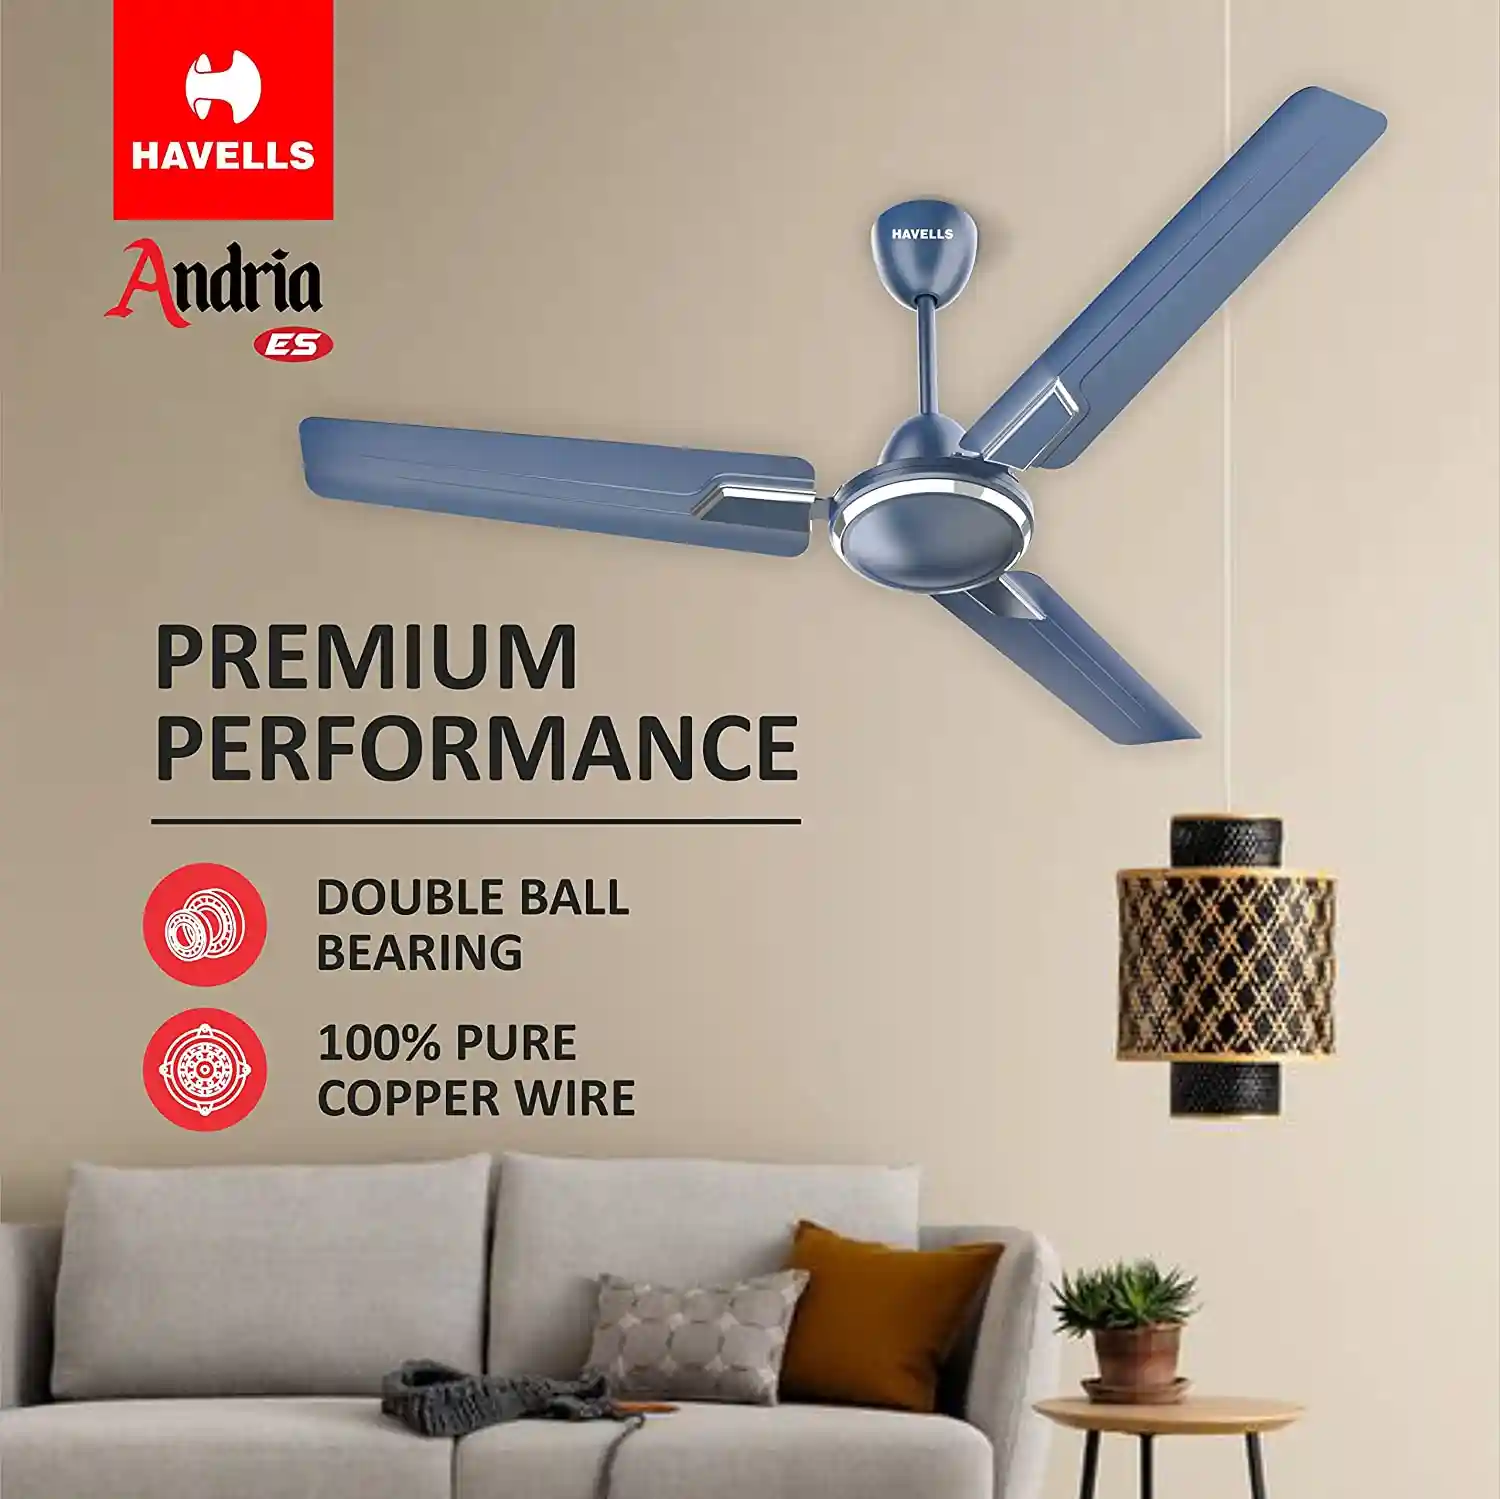 Havells 1200mm Andria Energy Saving best silent Ceiling Fan in india Indigo Blue